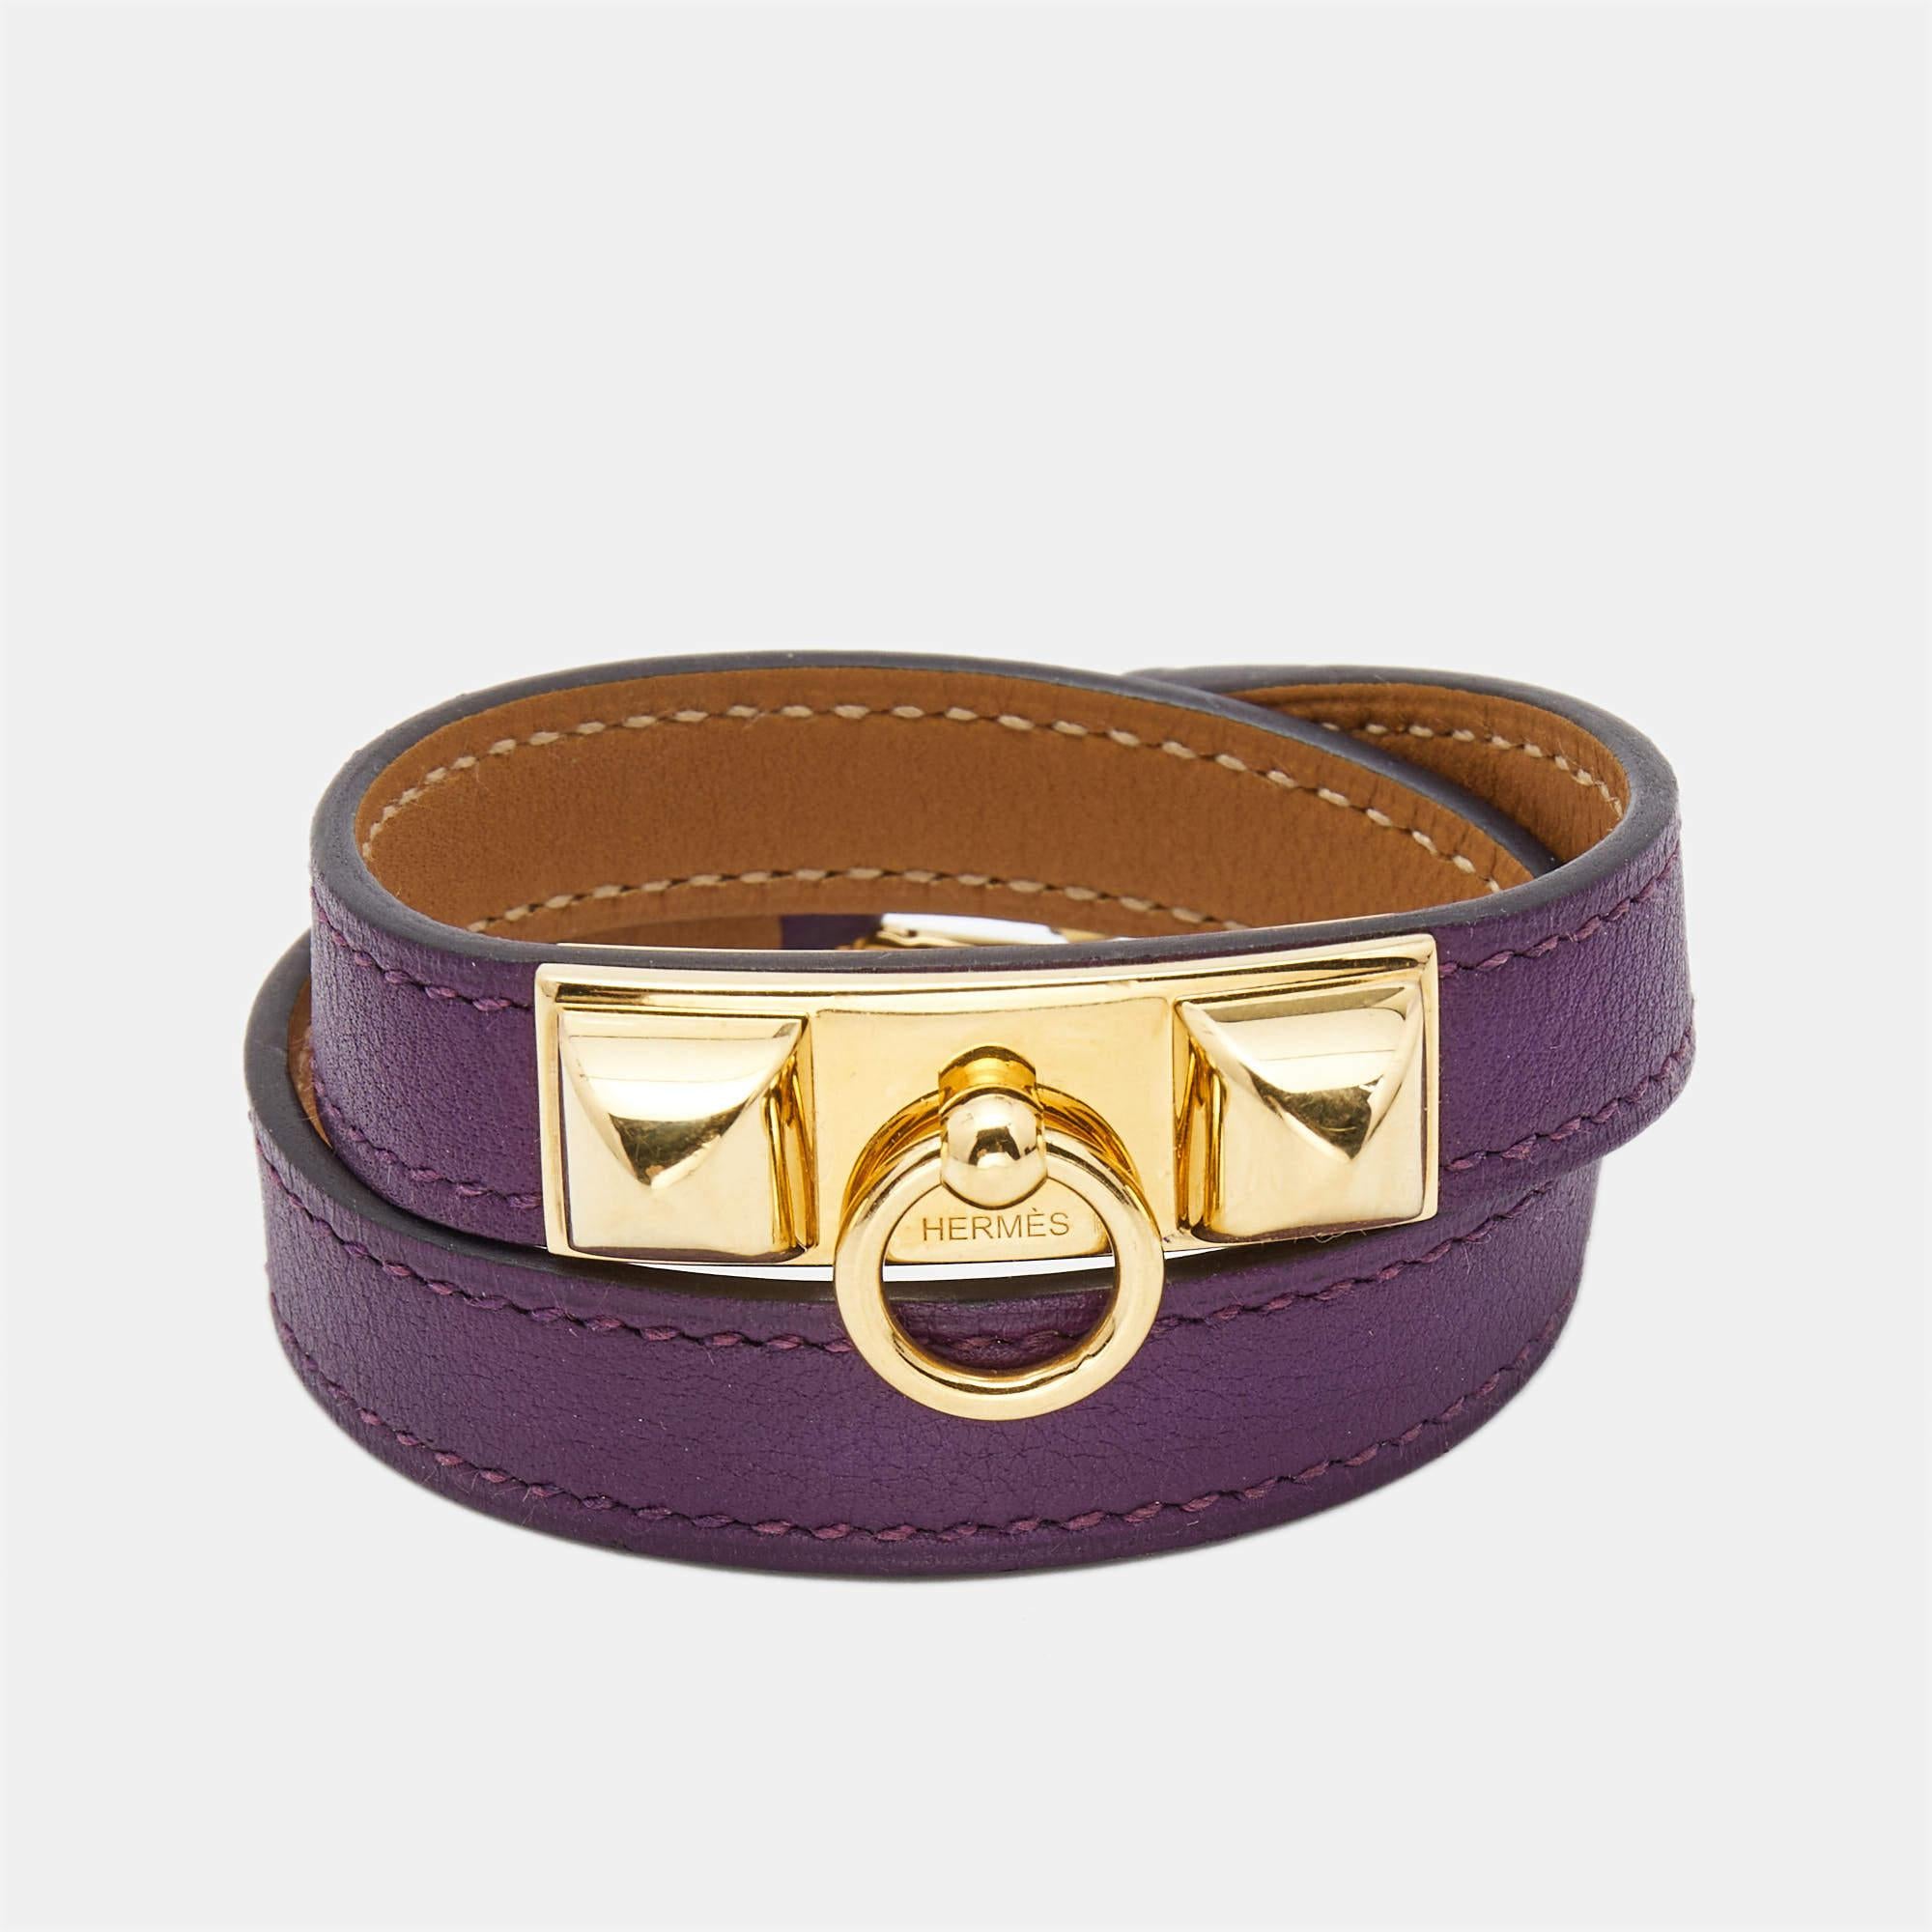 This Hermès Double Tour bracelet is a chic accessory that can be paired with everything, from casuals to evening outfits. Made from leather, it is beautified with pyramid studs and a ring in gold-plated metal. The brown bracelet has a long strap